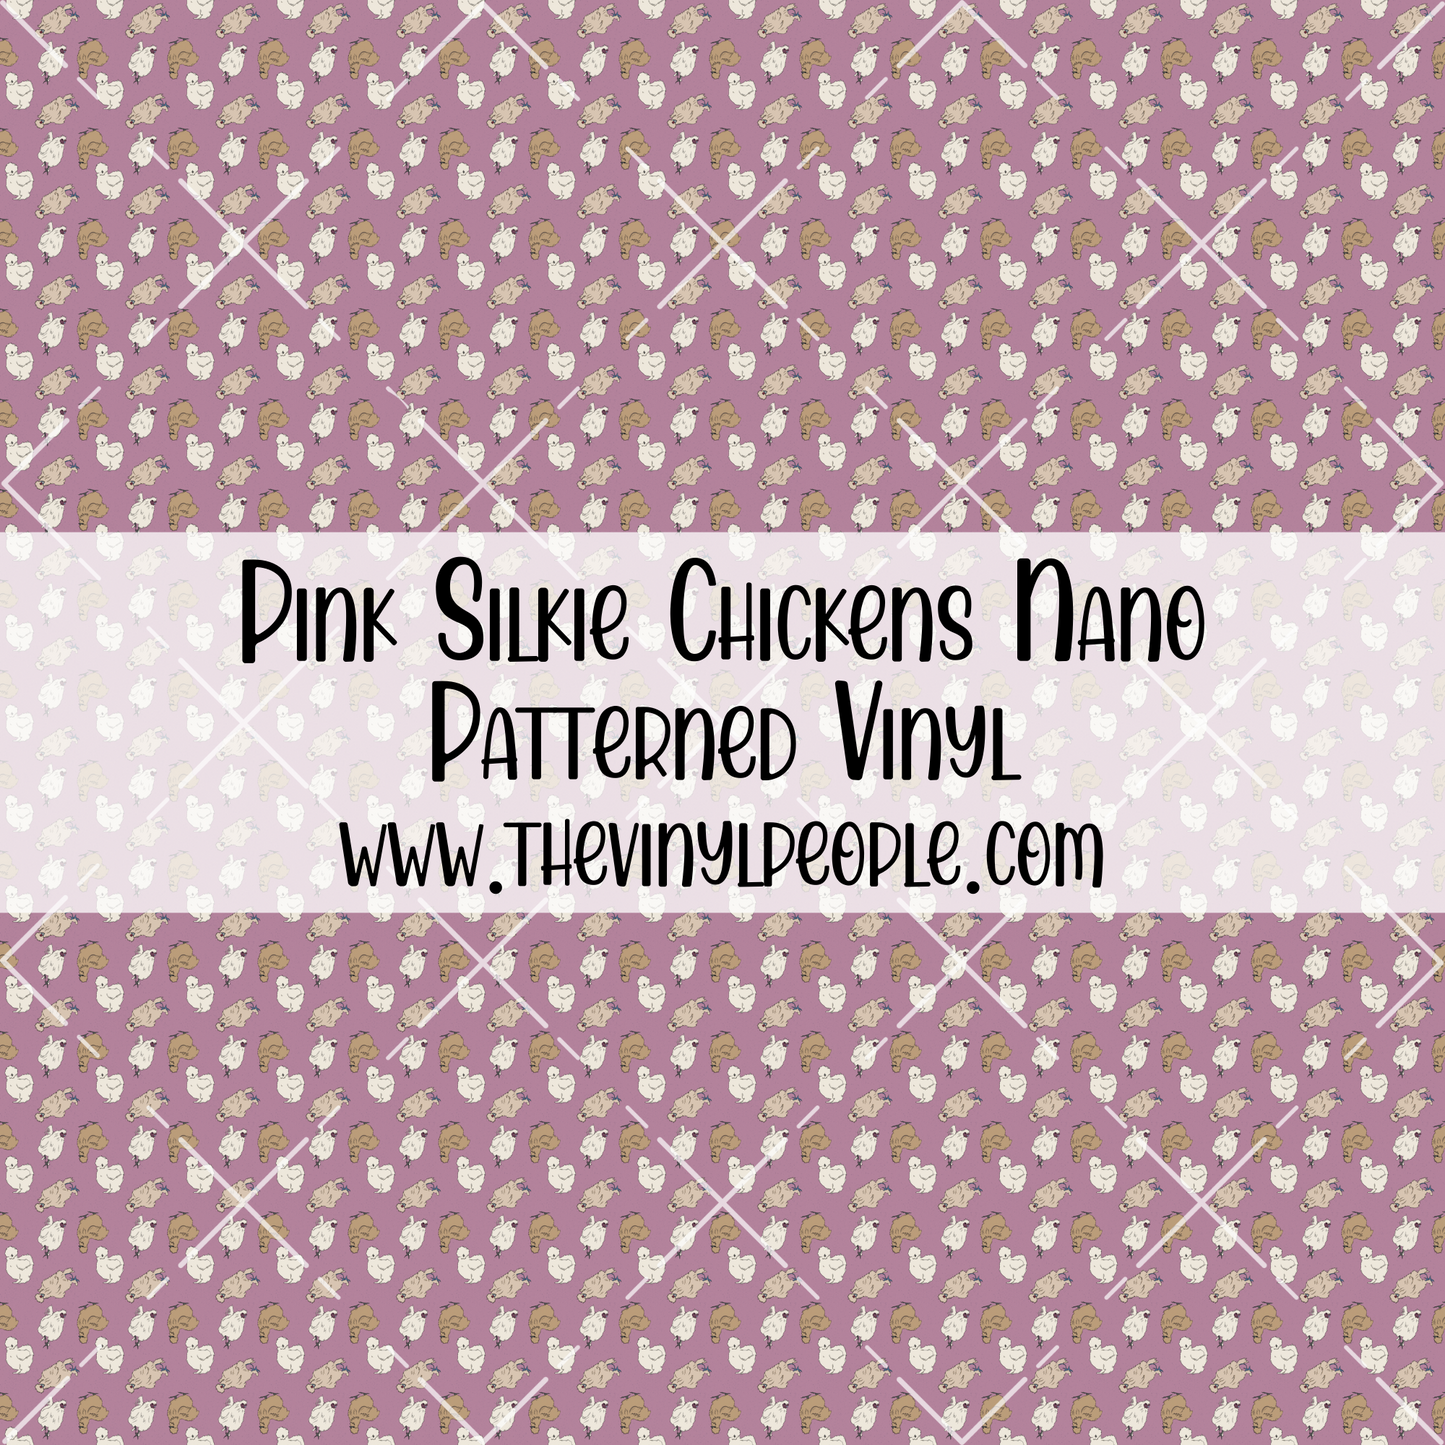 Pink Silkie Chickens Patterned Vinyl